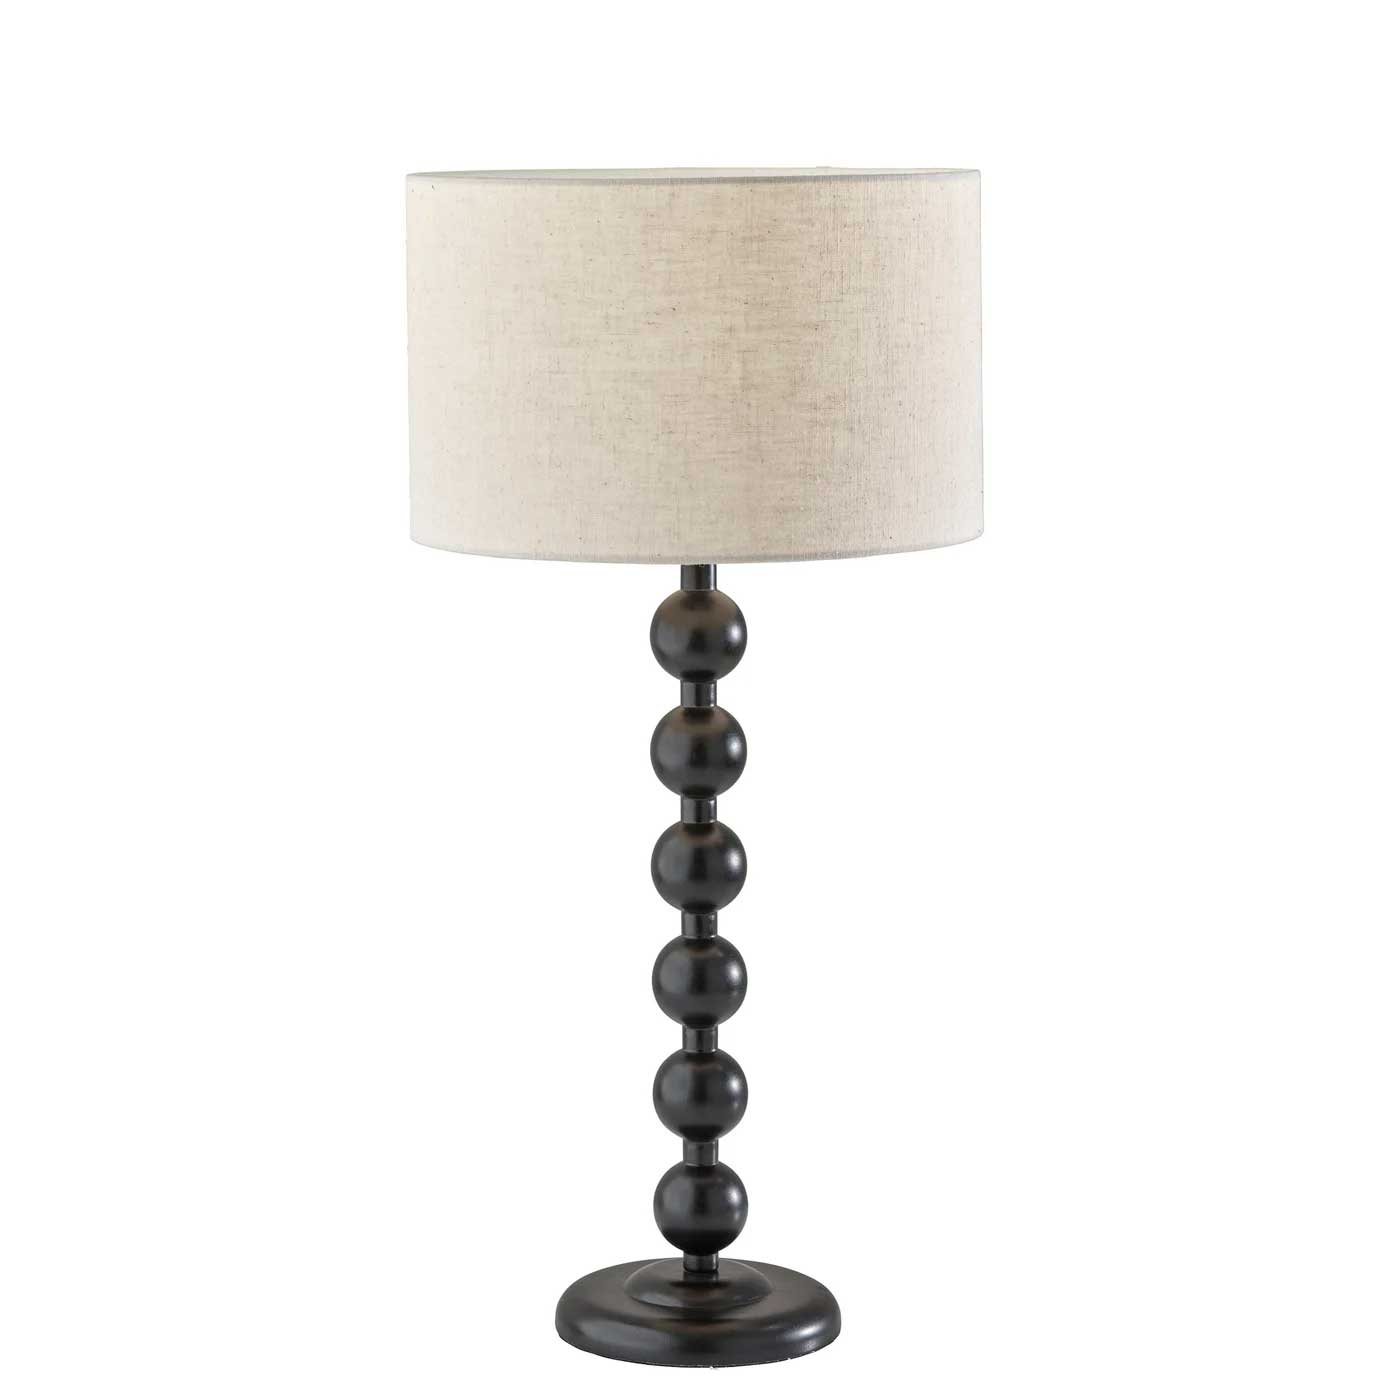 ORCHARD Table lamp Wood, Black - 3931-01 | ADESSO